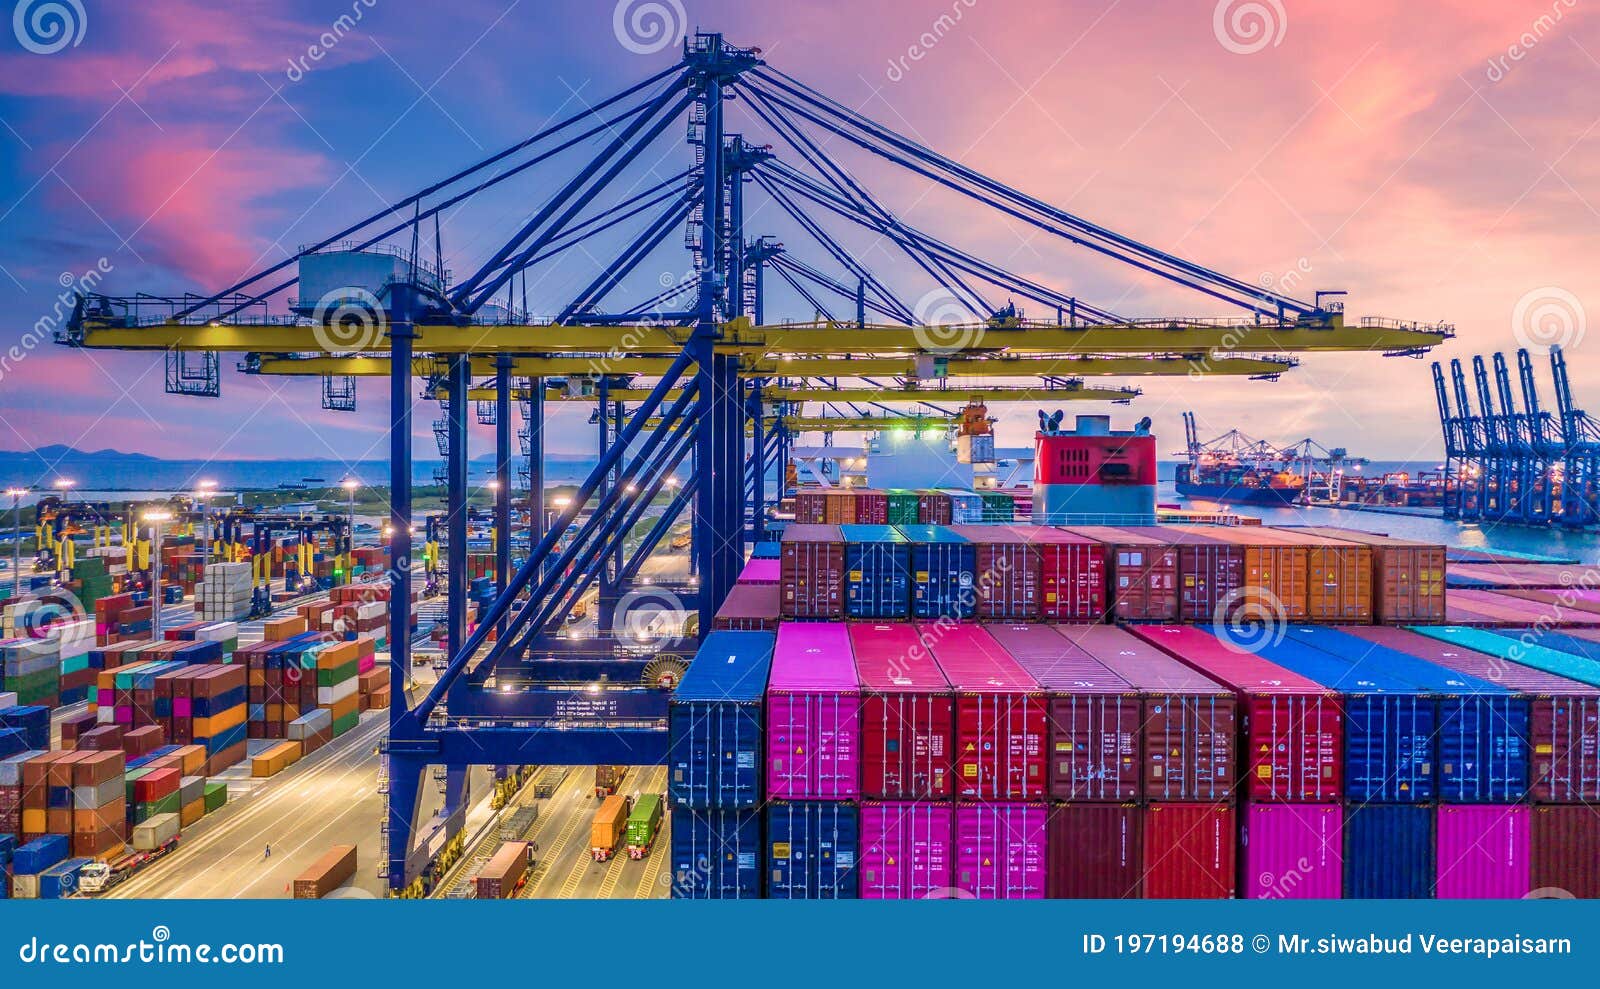 container ship in deep sea port at night, global business logistic import export freight shipping transportation oversea worldwide